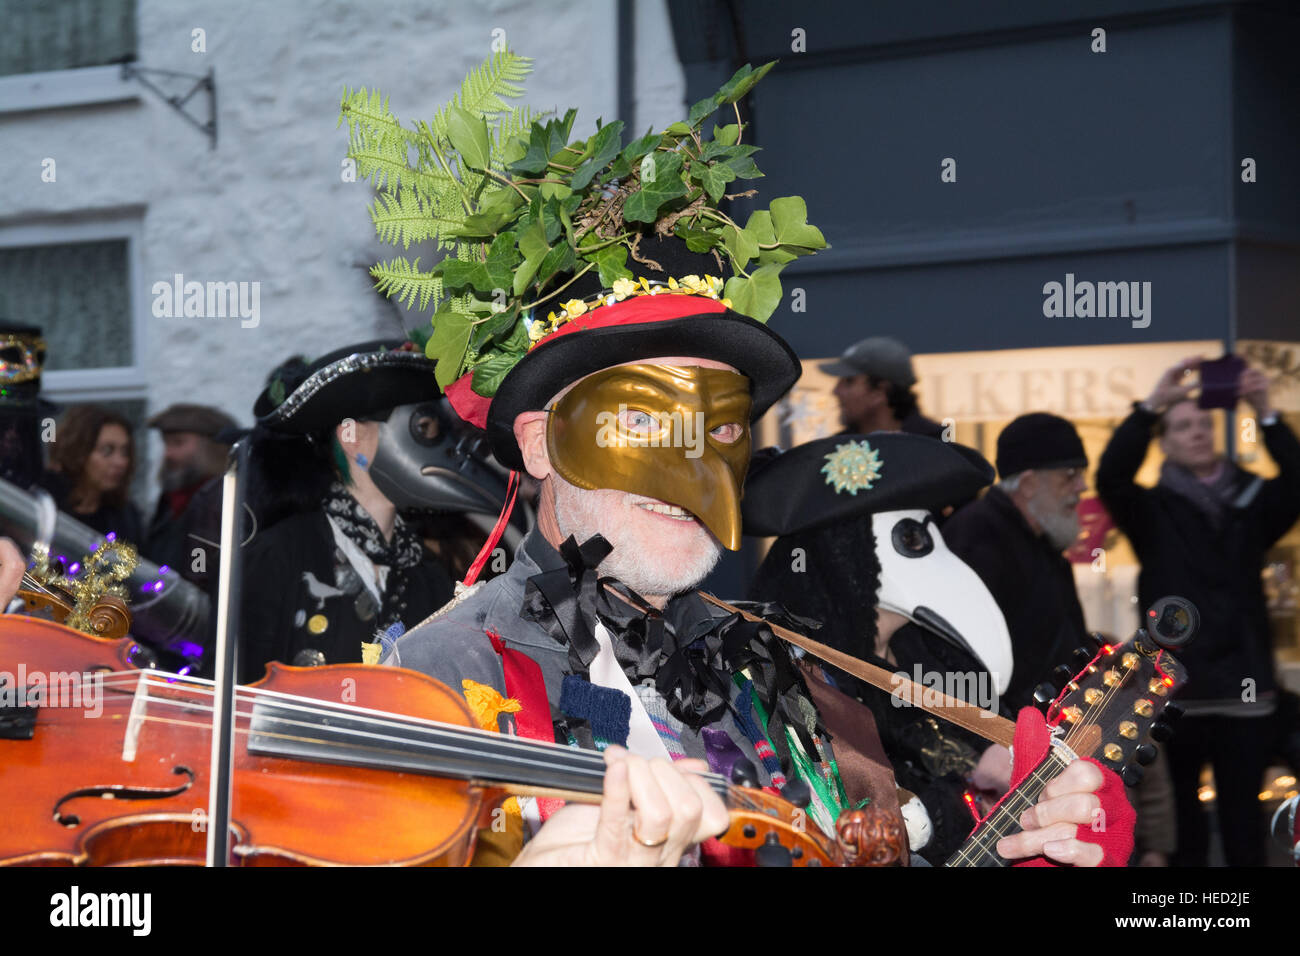 Penzance, Cornwall, UK. 21st December 2016. The annual Montol festival held on the date of the feast of St Thomas the Apostle and the winter solstice. Guise processions and lantern parades take place leading to the chalking of the Mock. The first parade seen here at sundown. Credit: Simon Maycock/Alamy Live News Stock Photo